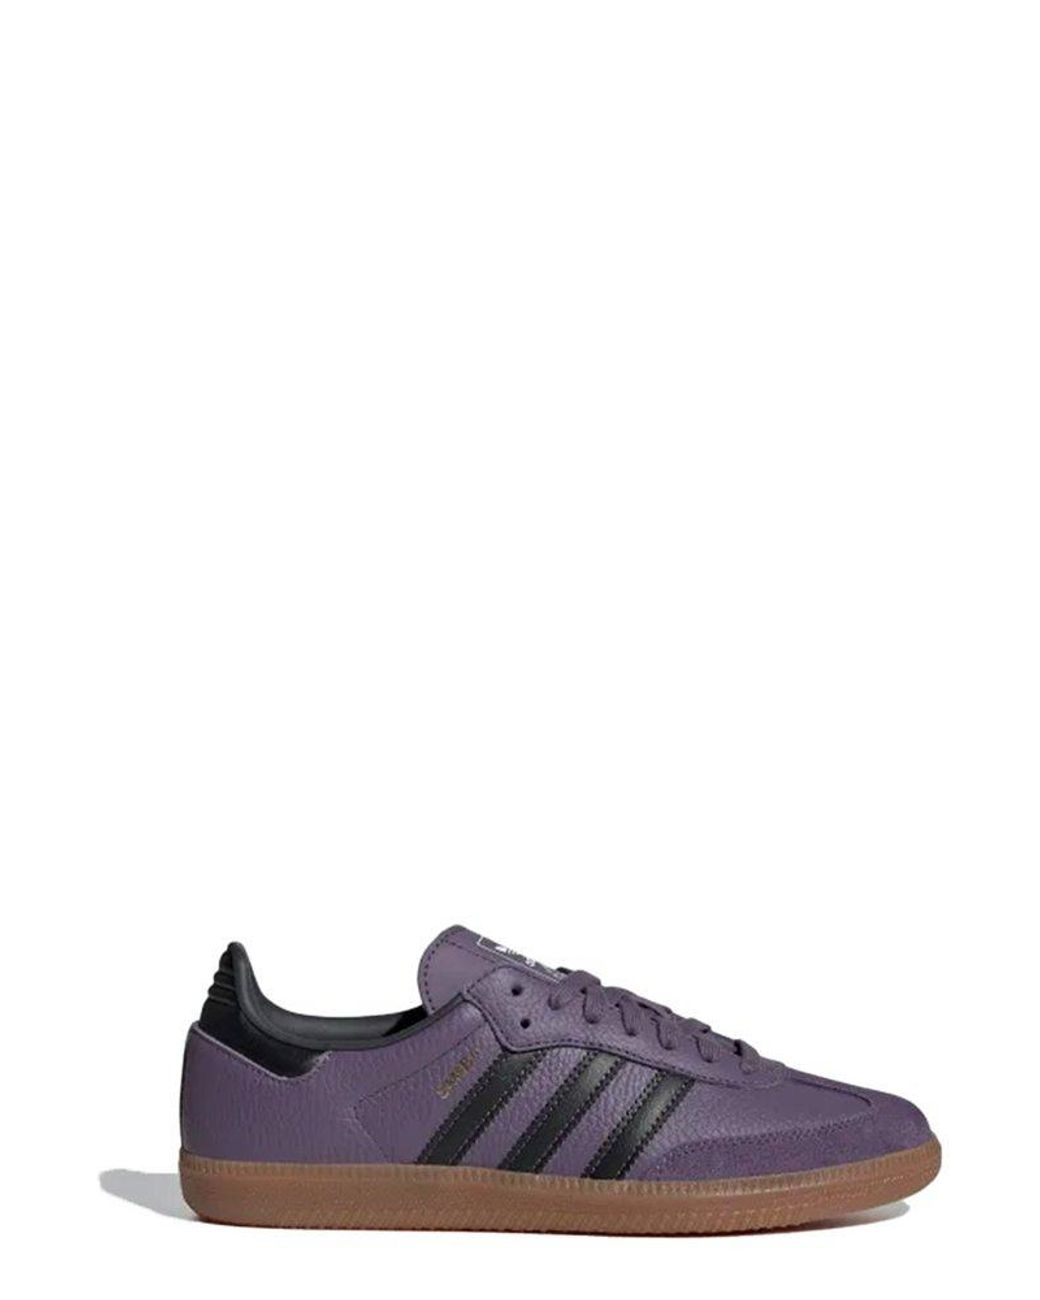 adidas Samba Og Lace-up Sneakers in Purple | Lyst